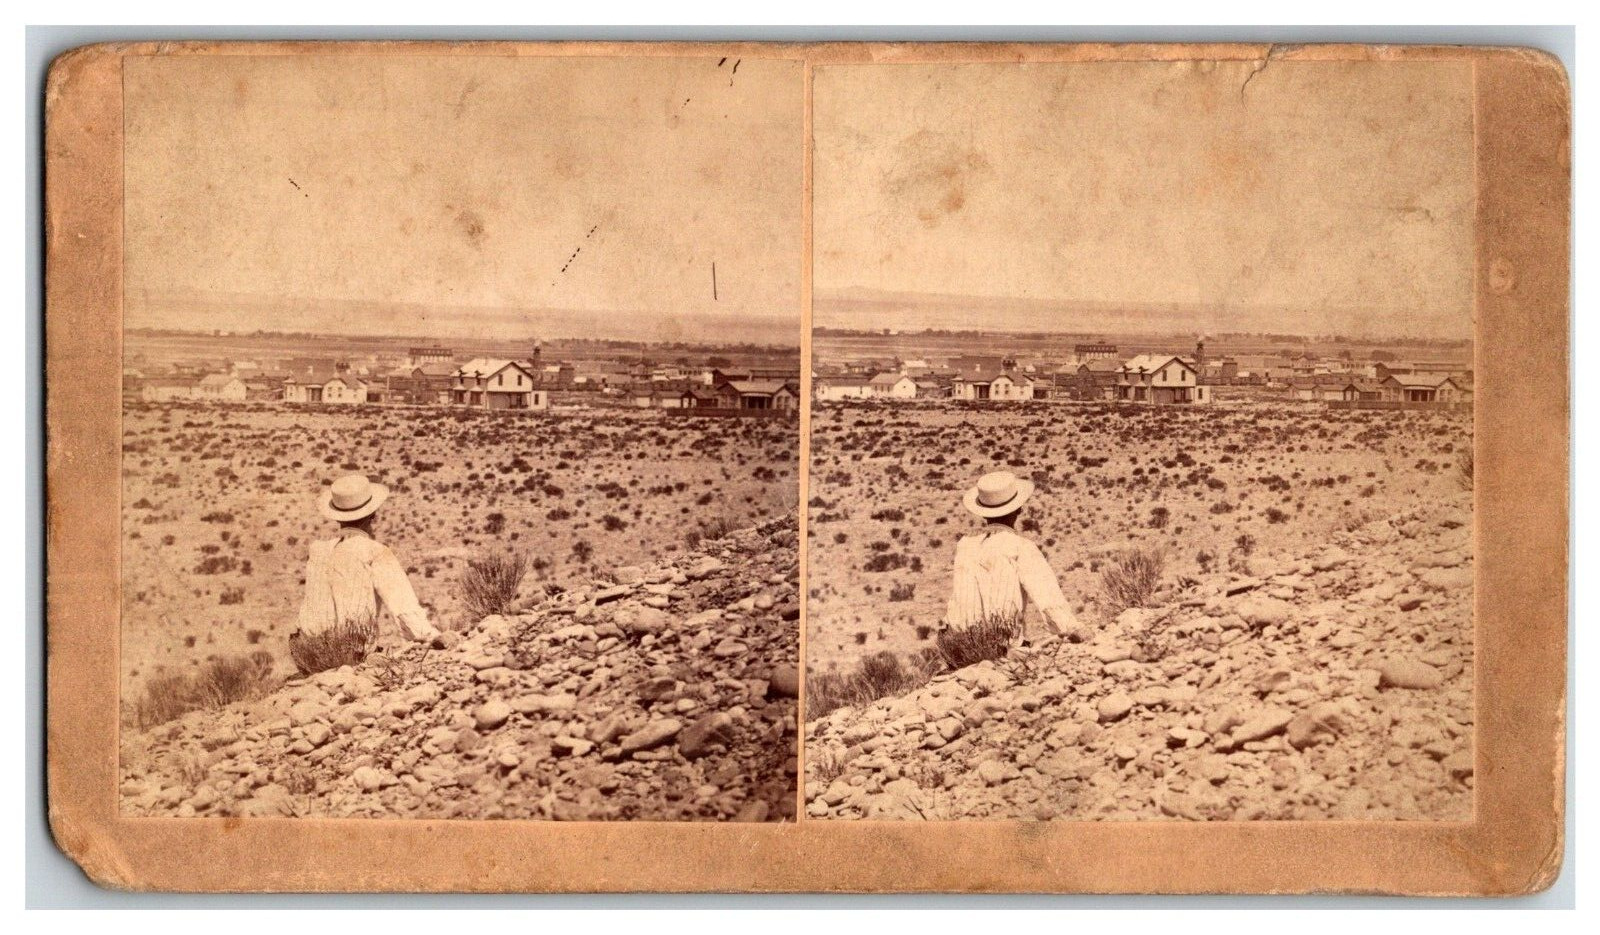 1881 Stereoview of Albuquerque New Mexico From the Foothills Ben Wettick